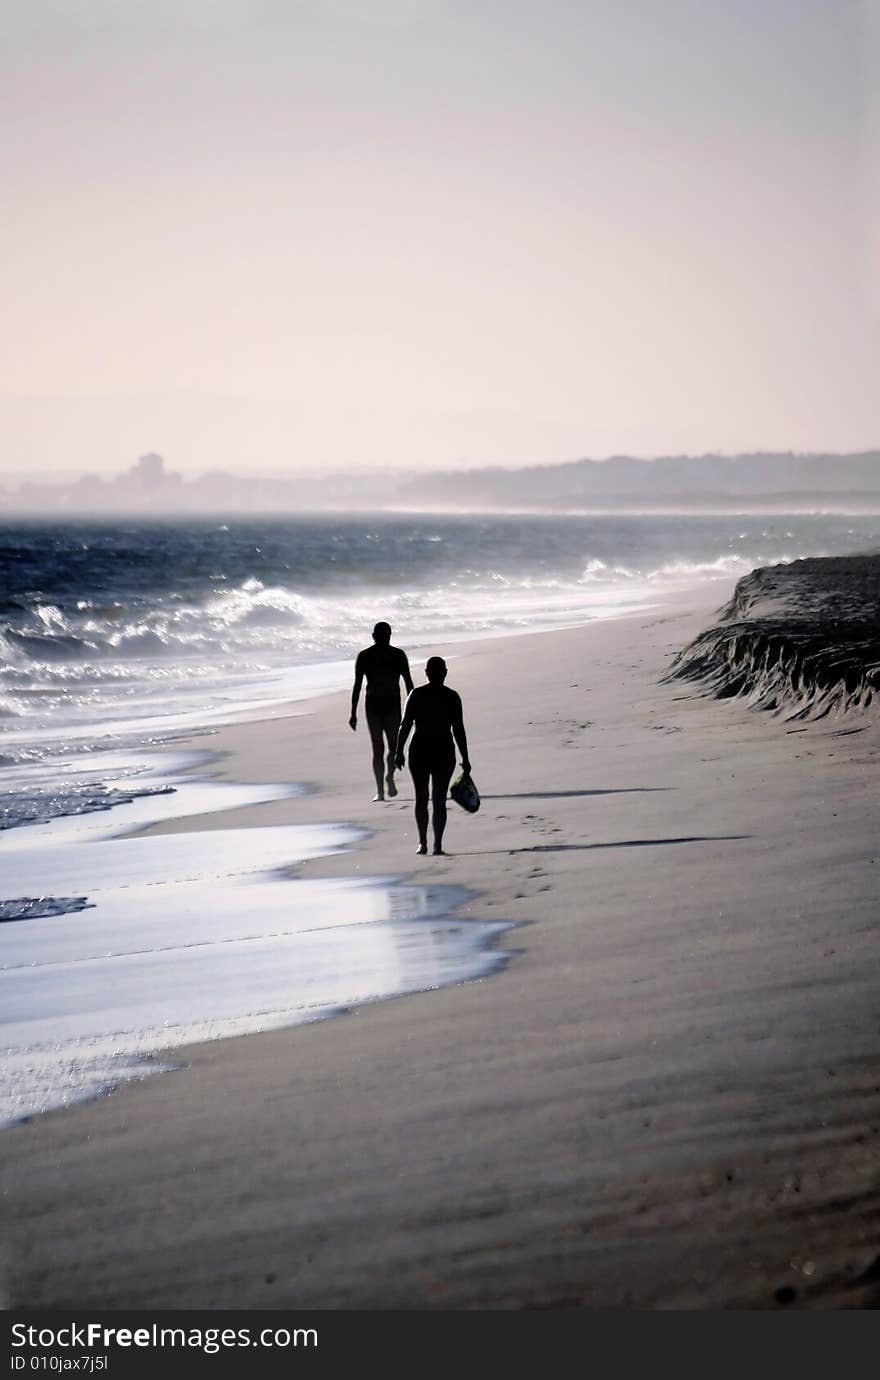 Two lonely figures walking down the beach shoreline on a windy day.